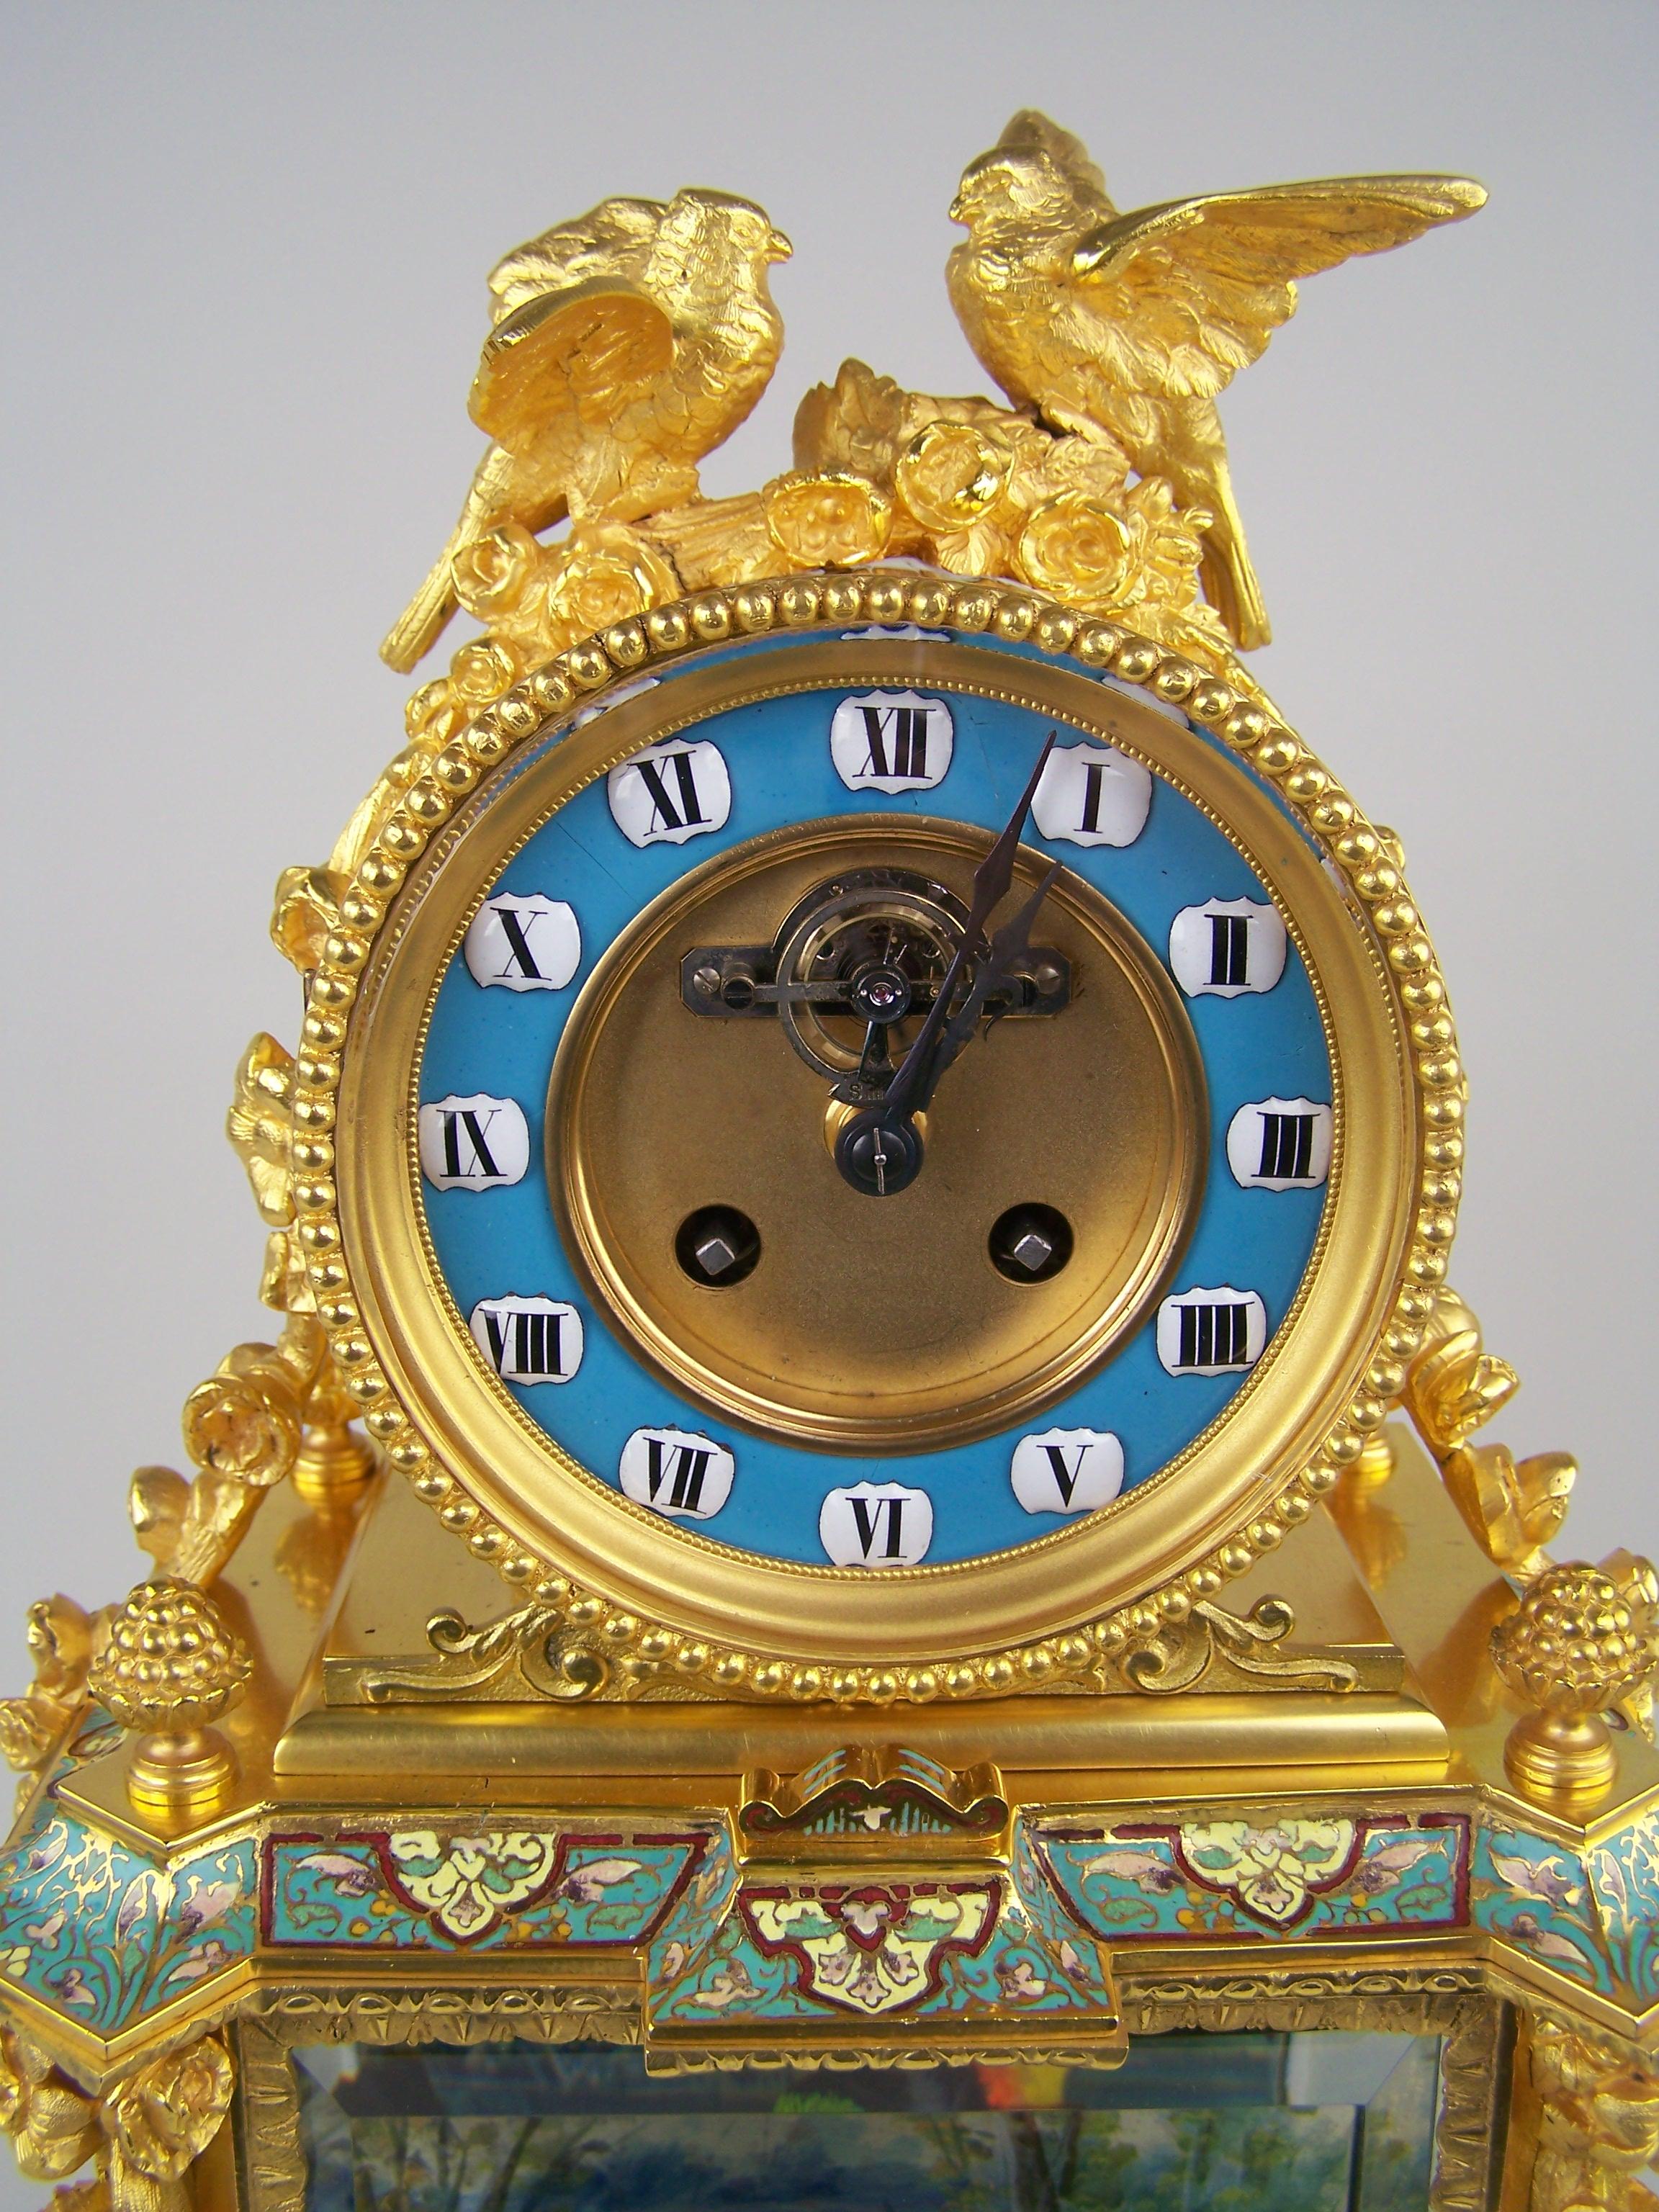 French Clock with Singing Bird Automaton and Musical Mechanism by Bontems